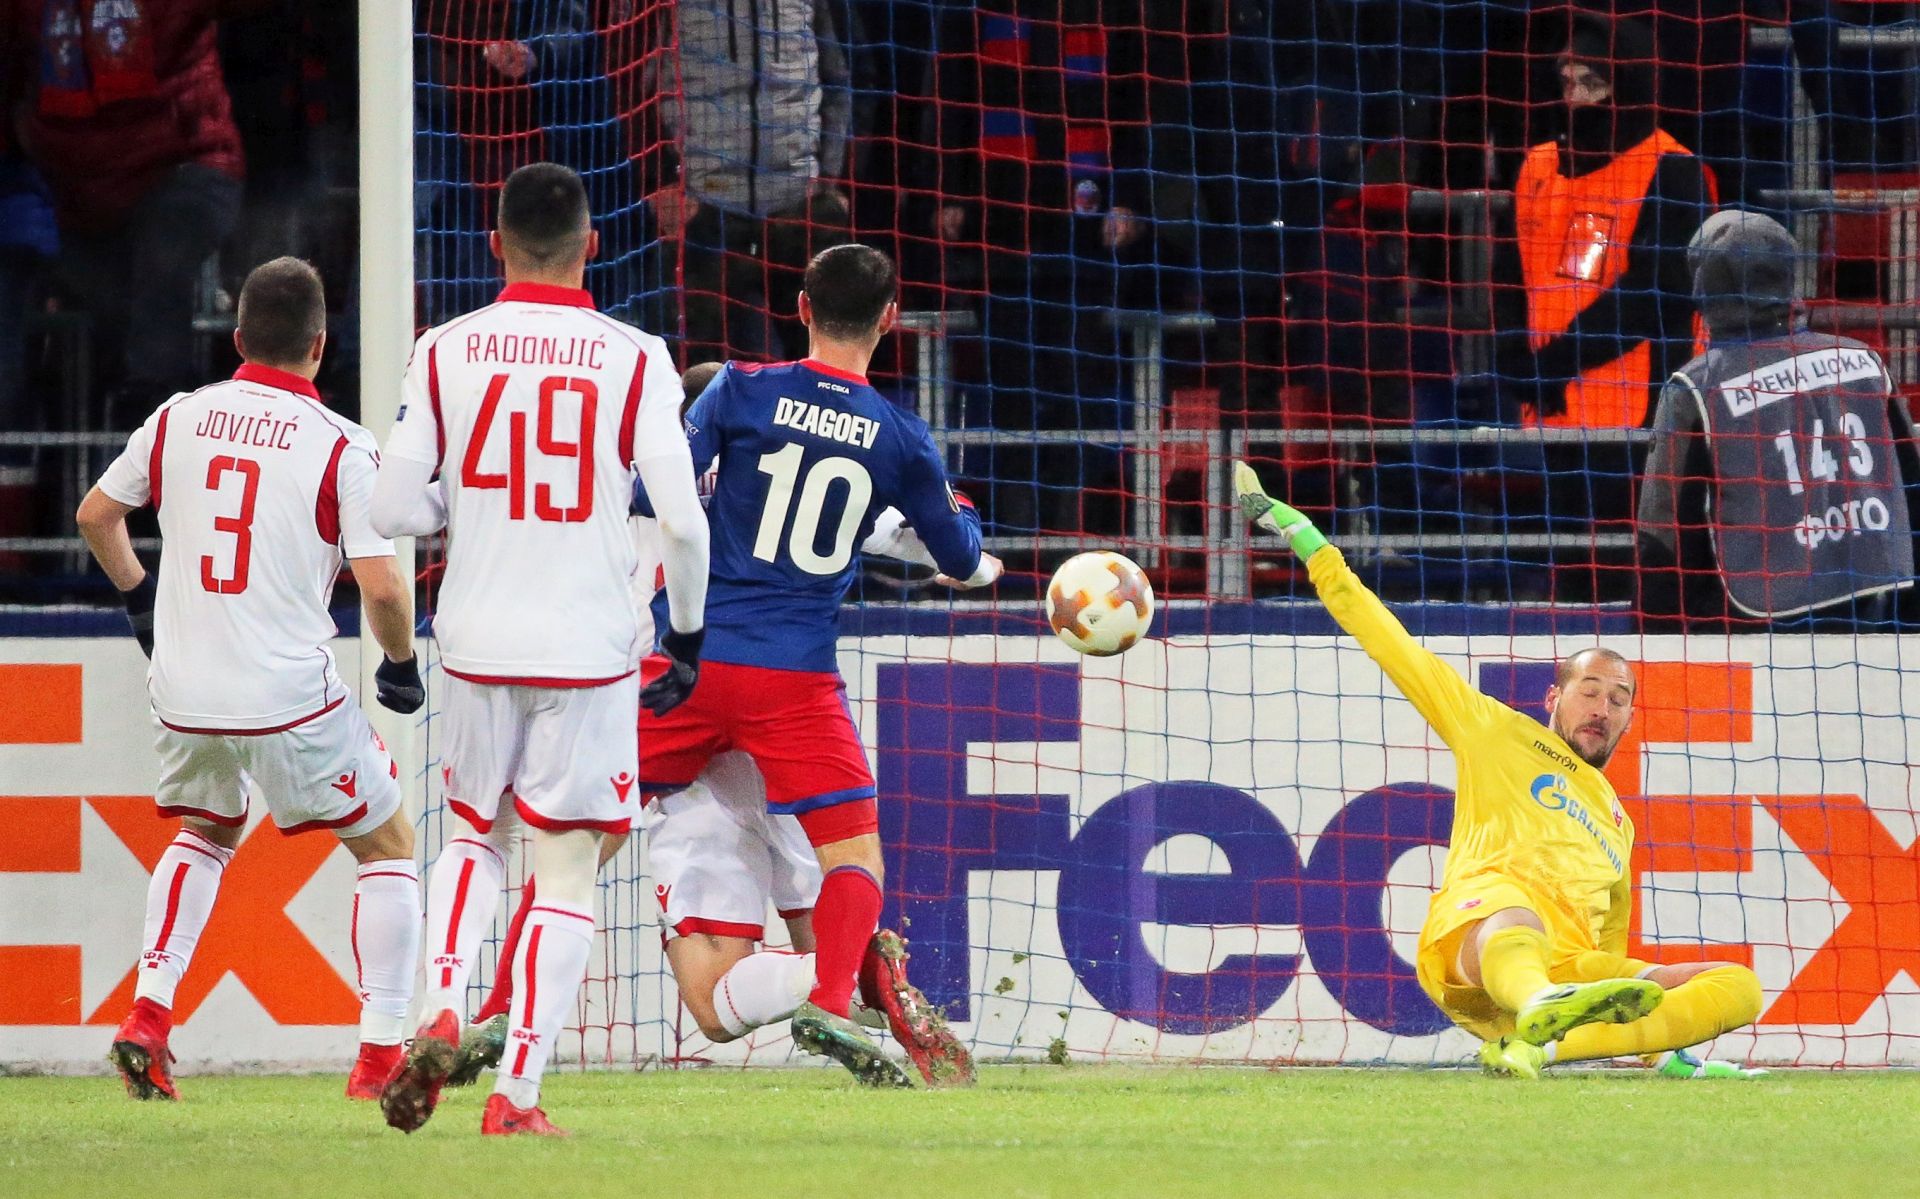 epa06551041 Alan Dzagoev (C) of CSKA Moscow scores the 1-0 lead against Red Star's goalkeeper Milan Borjan (R) during the UEFA Europa League round of 32, second leg soccer match between CSKA Moscow and Red Star Belgrade in Moscow, Russia, 21 February 2018.  EPA/MAXIM SHIPENKOV